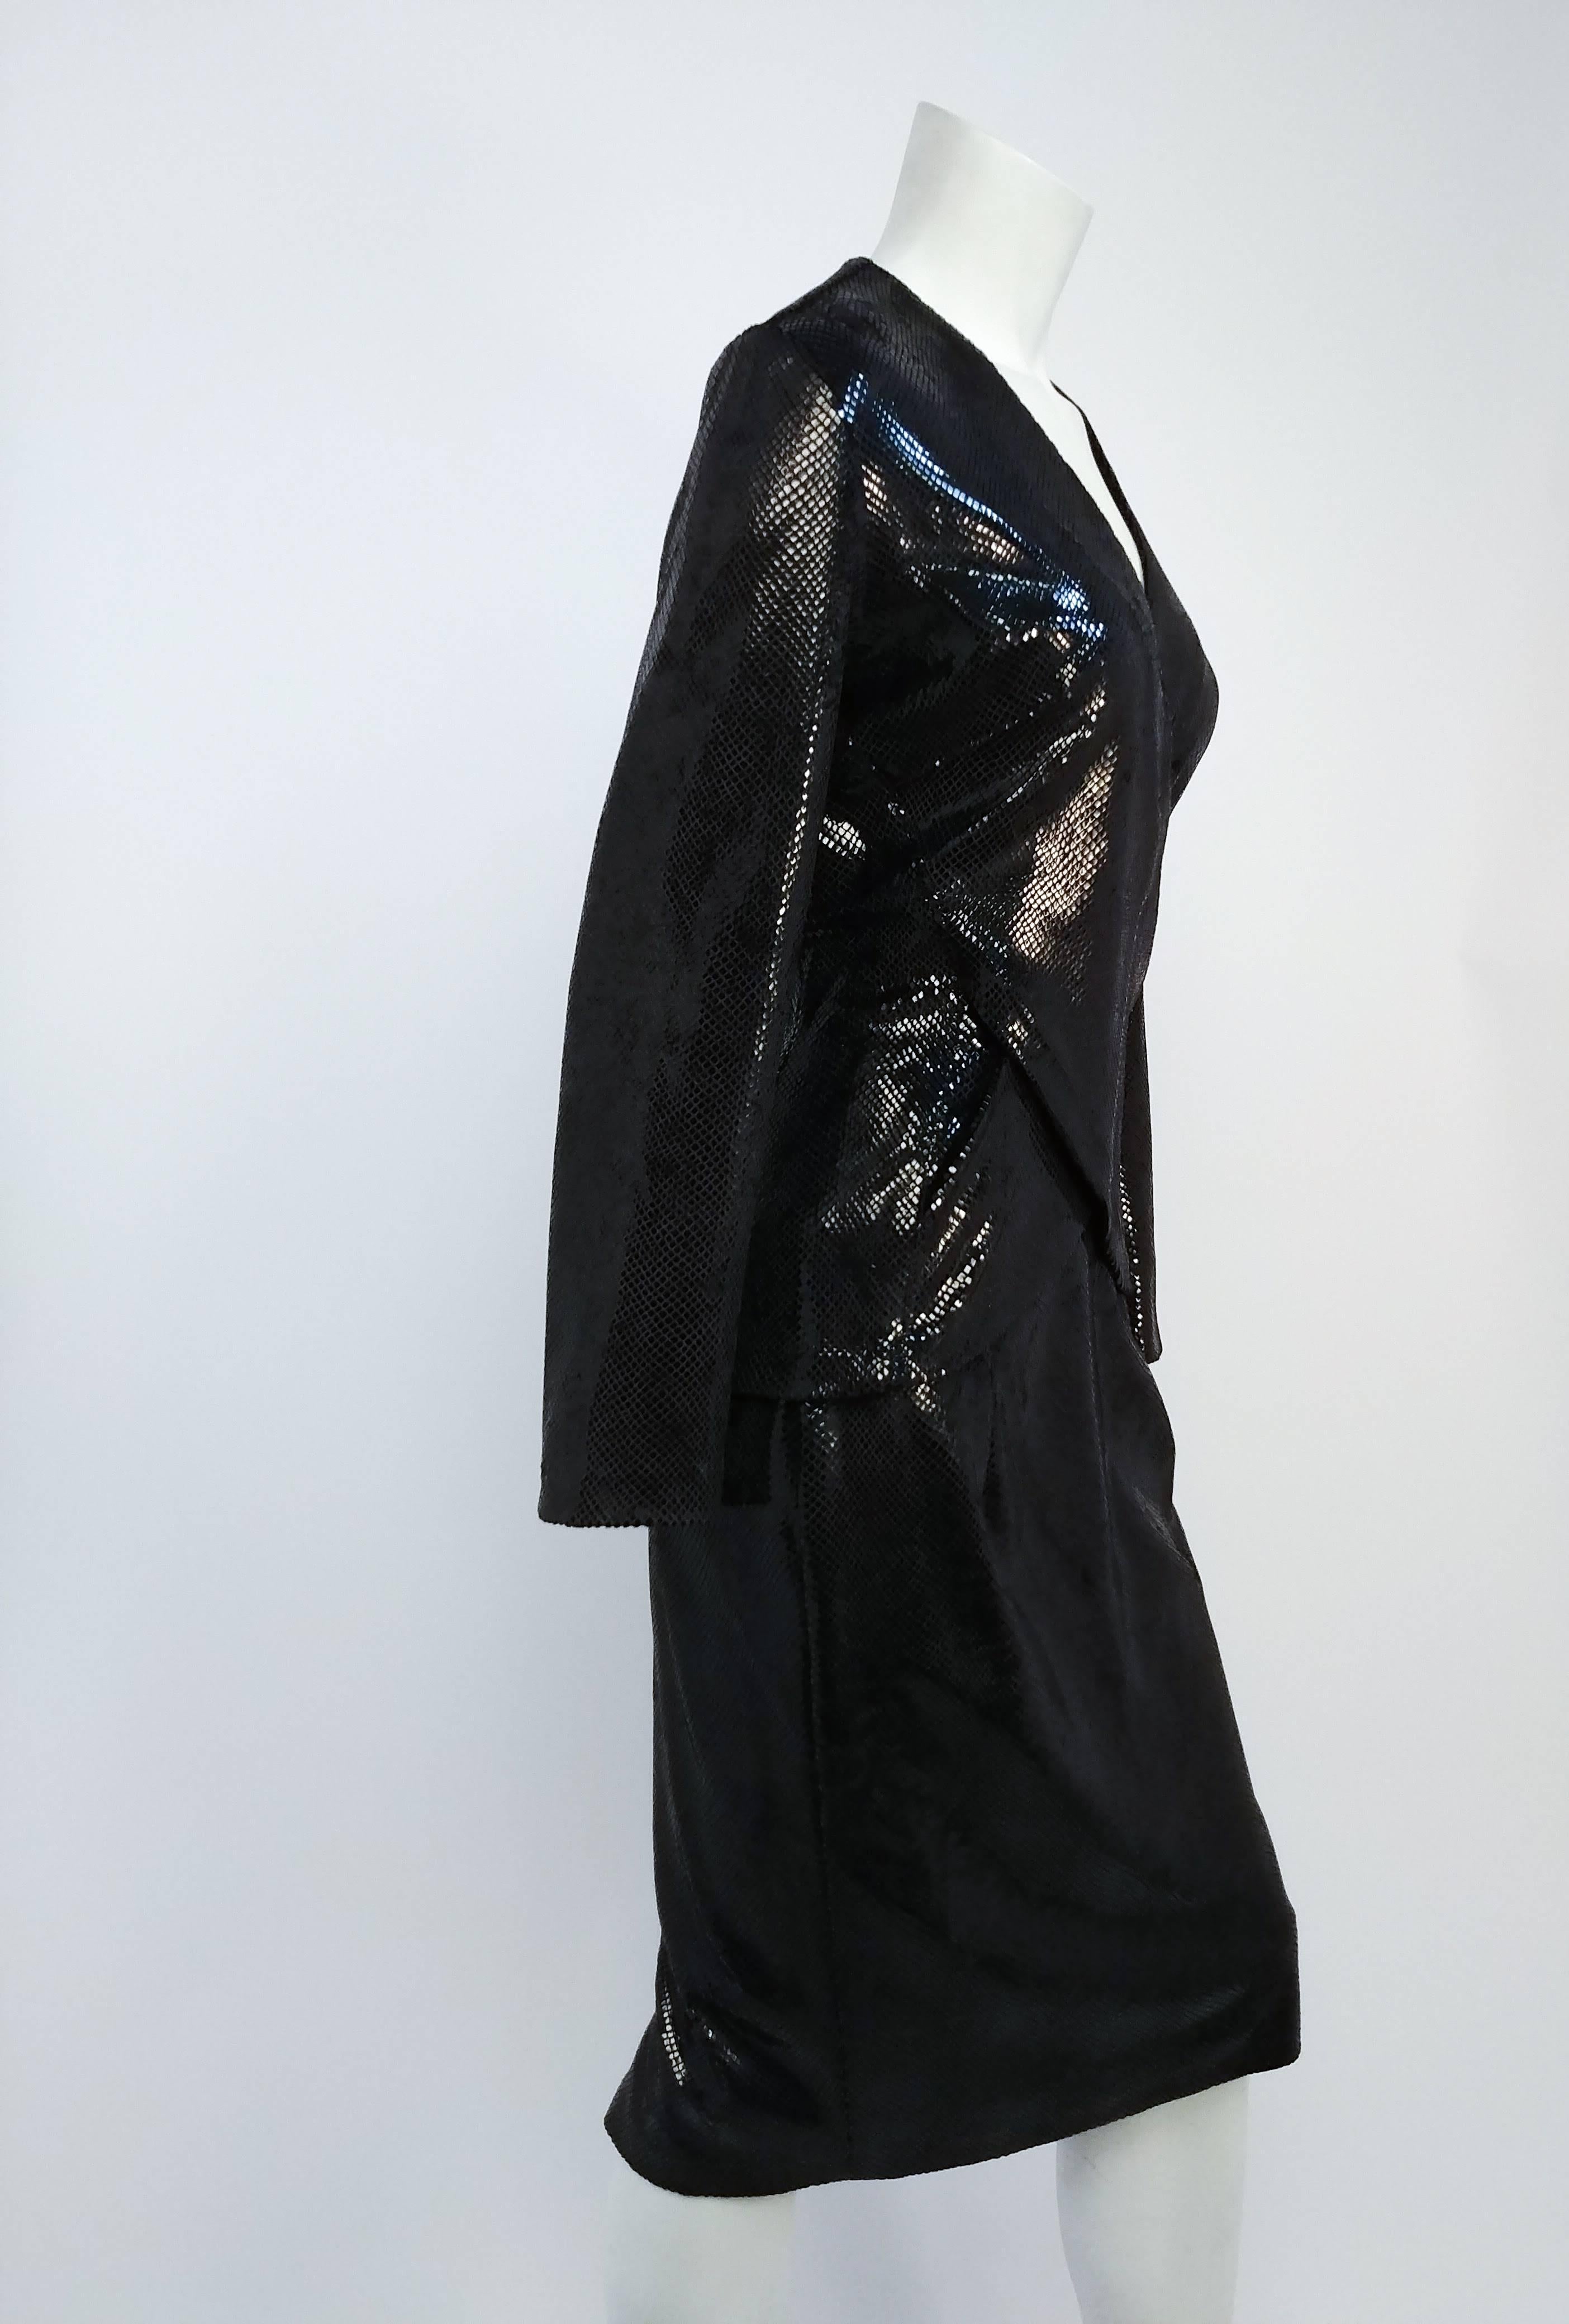 1980s Glossy Faux Snakeskin Black Skirt Suit Set. Draped crossover wrap top, side zip closure. Some stretch in fabric. Black pencil skirt. 